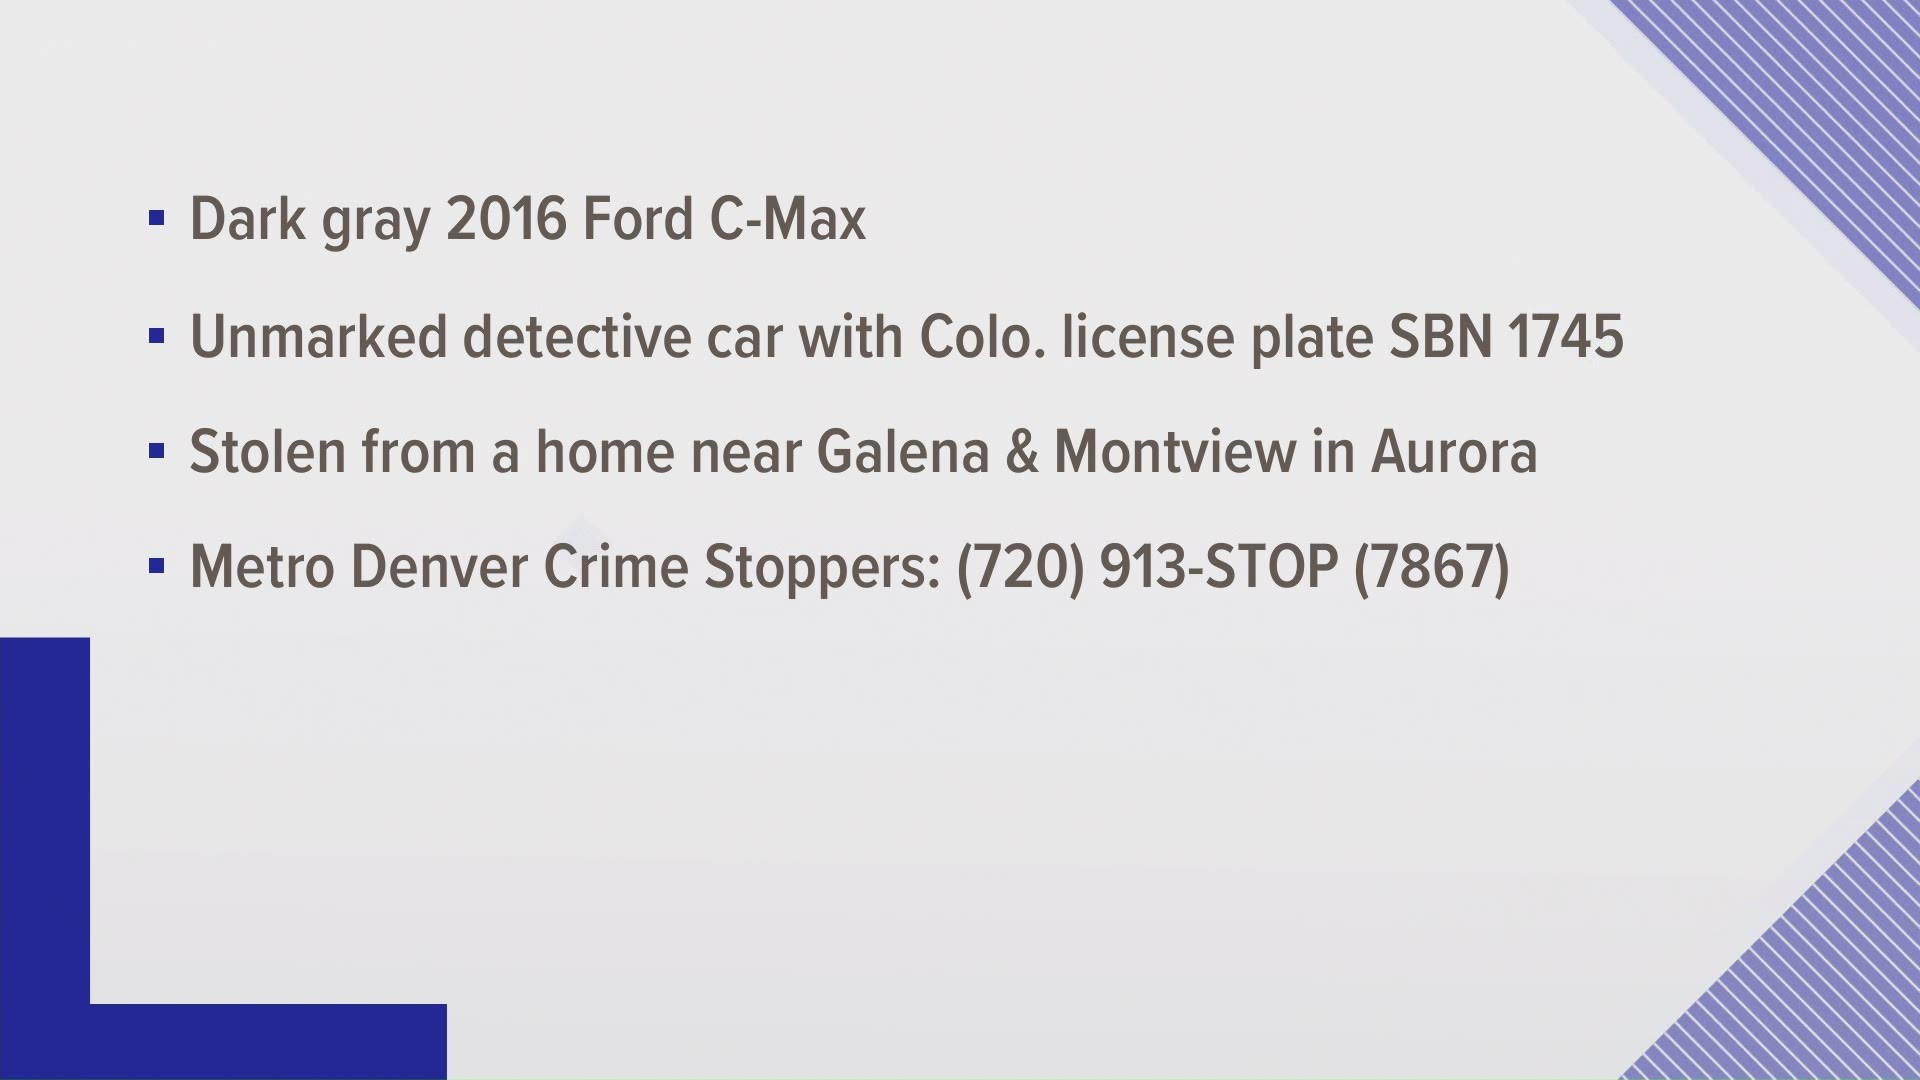 The 2016 Ford C-Max had two police jackets and a ballistic vest inside, but no weapons, according to APD.